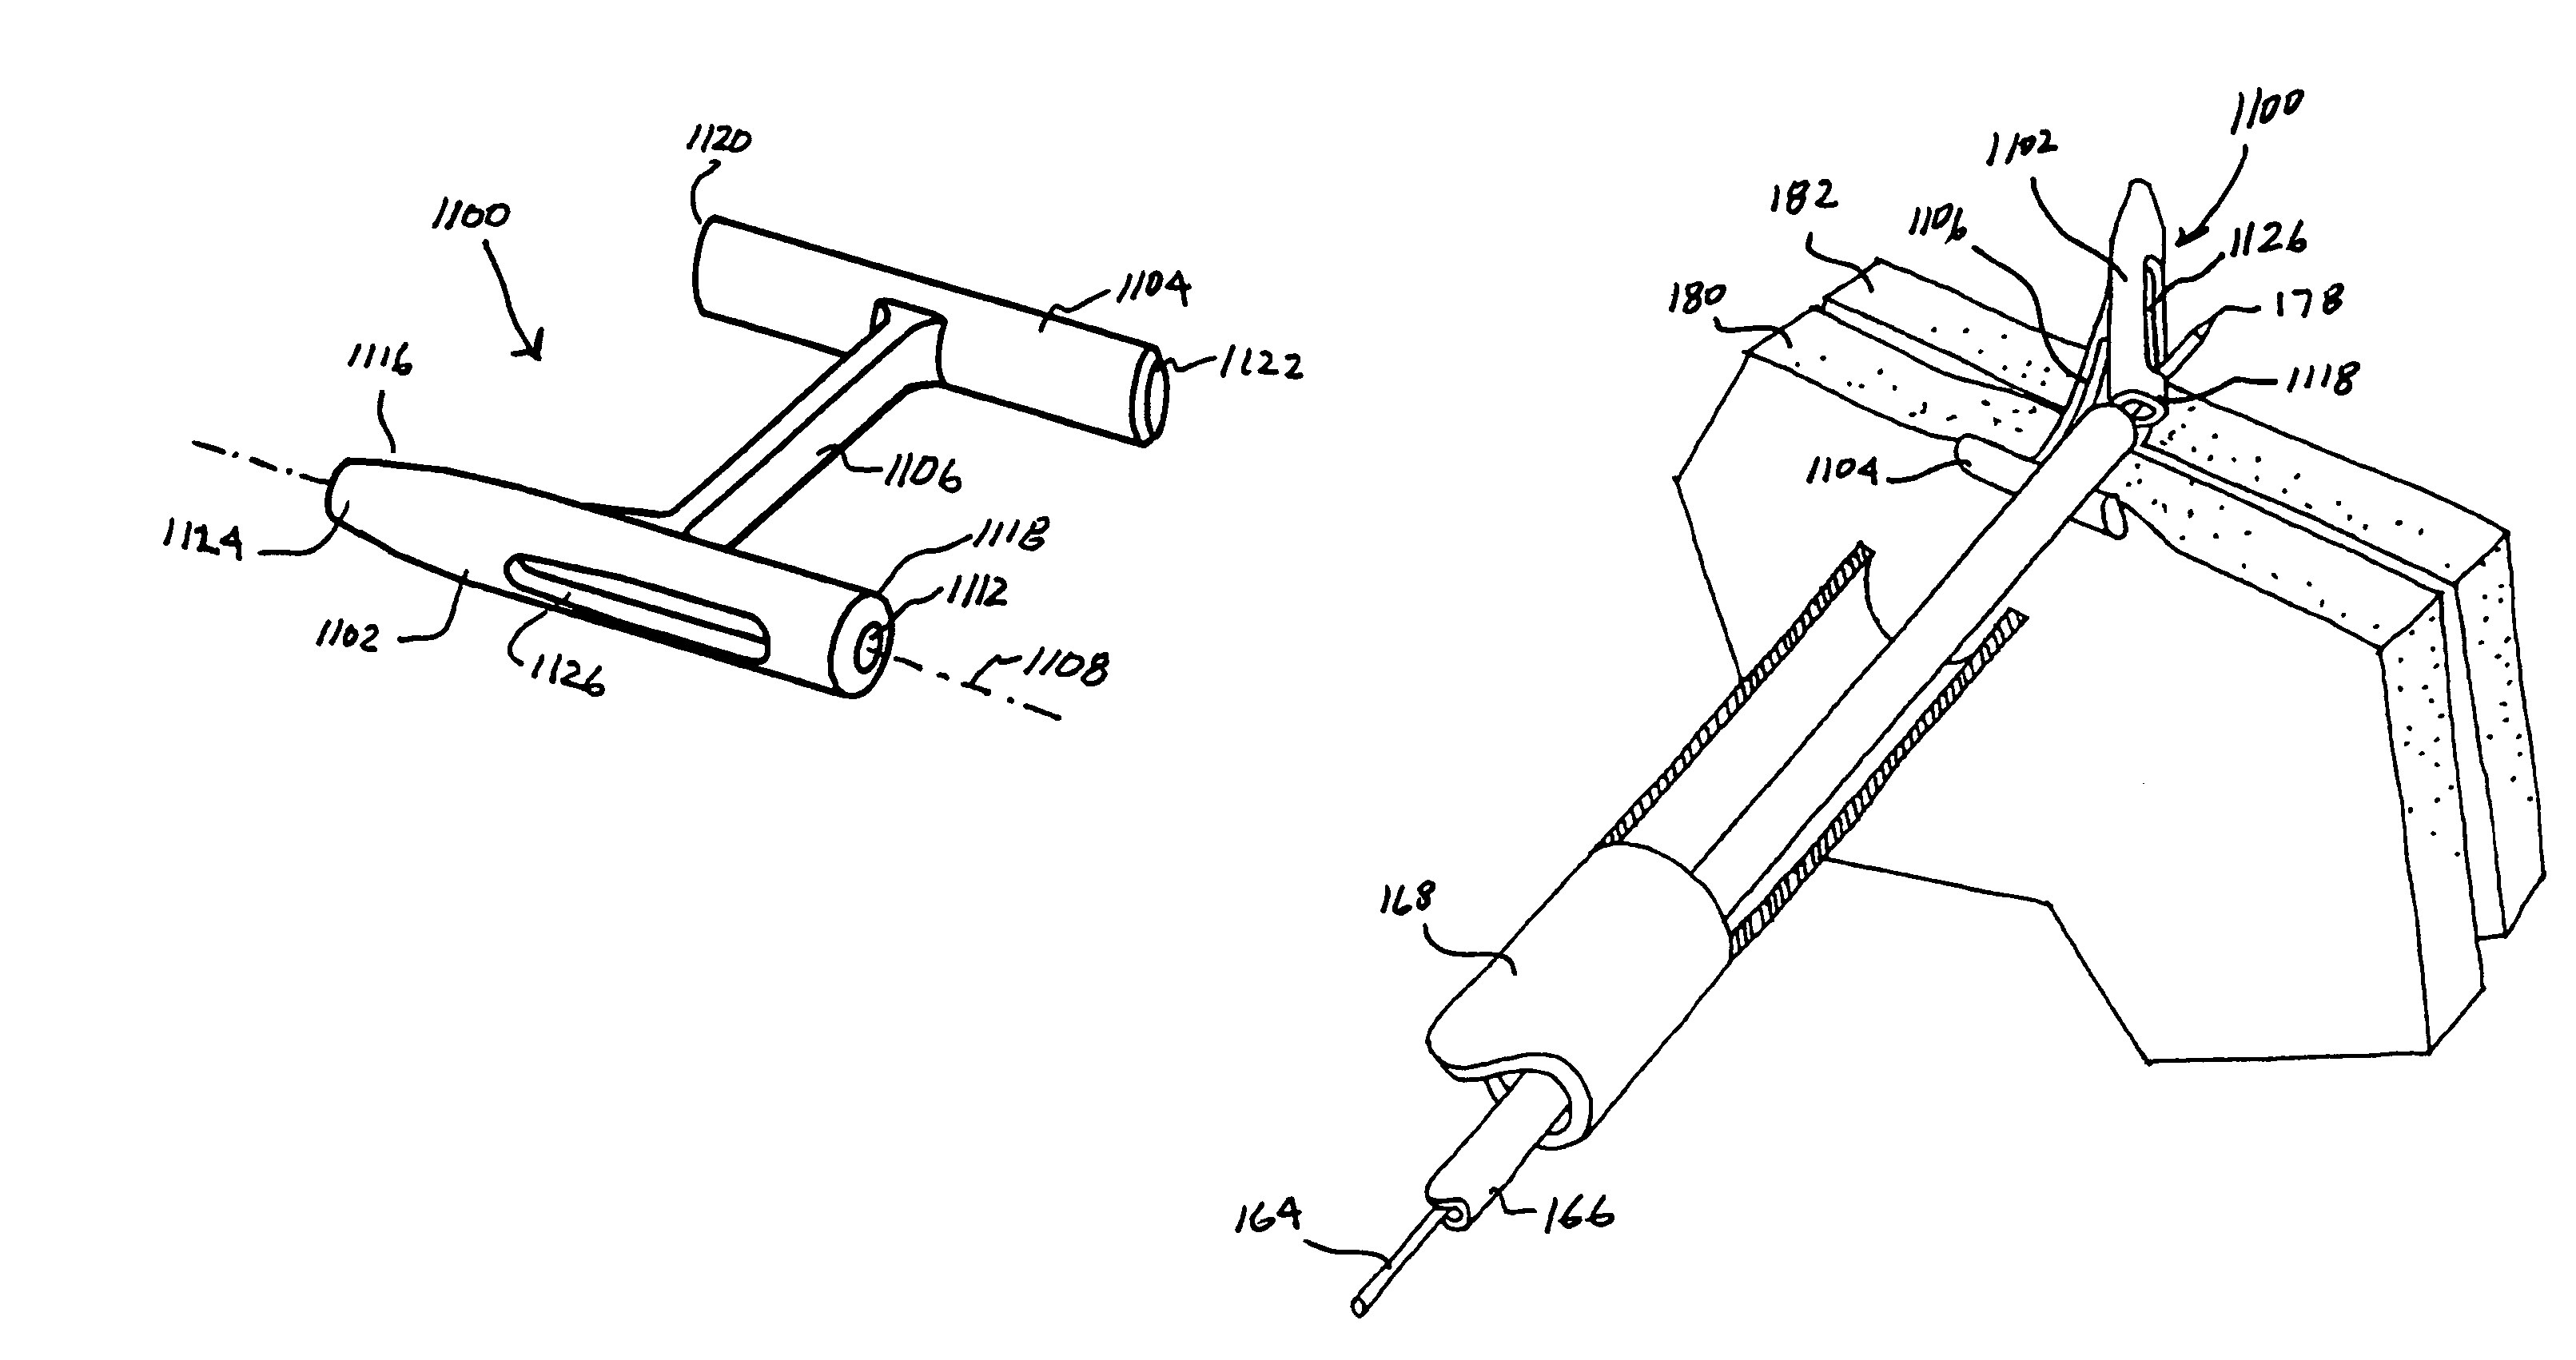 Tissue fixation devices and assemblies for deploying the same